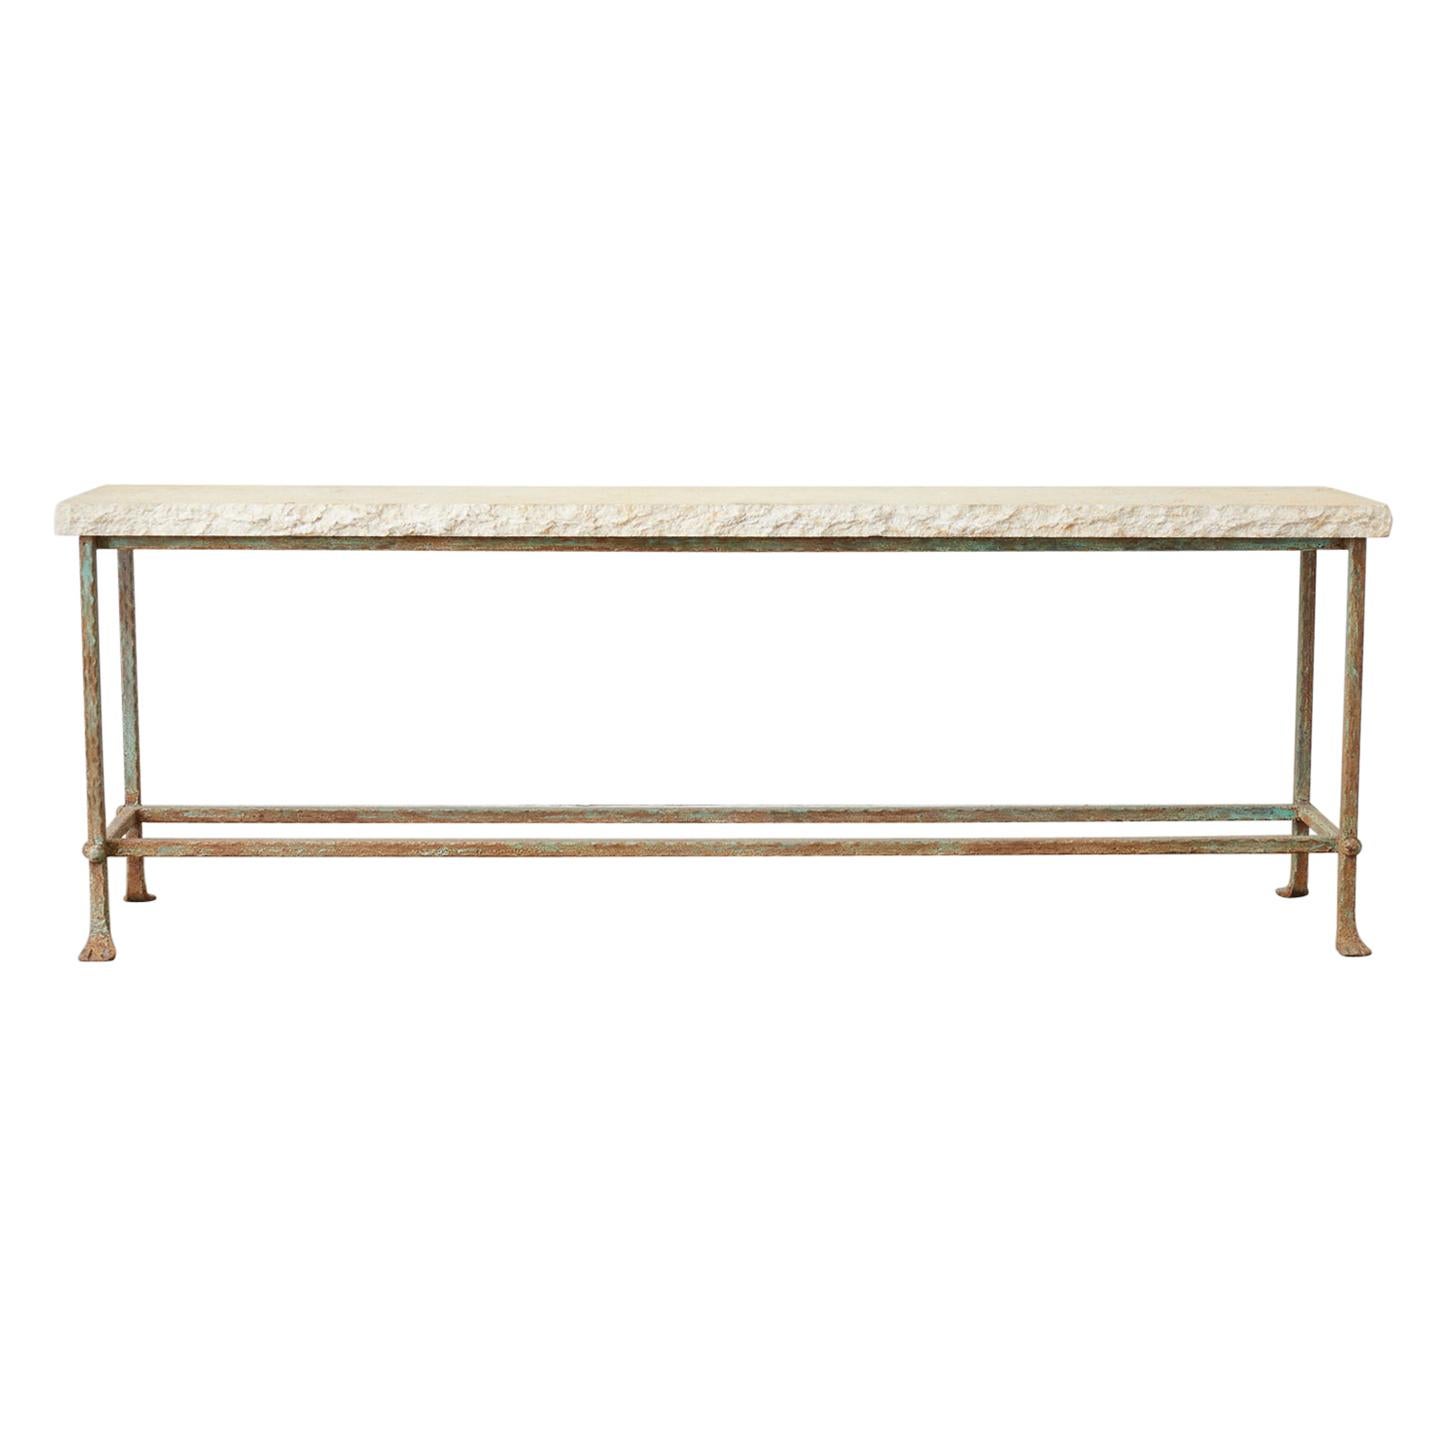 Monumental Stone and Iron Garden Console Table